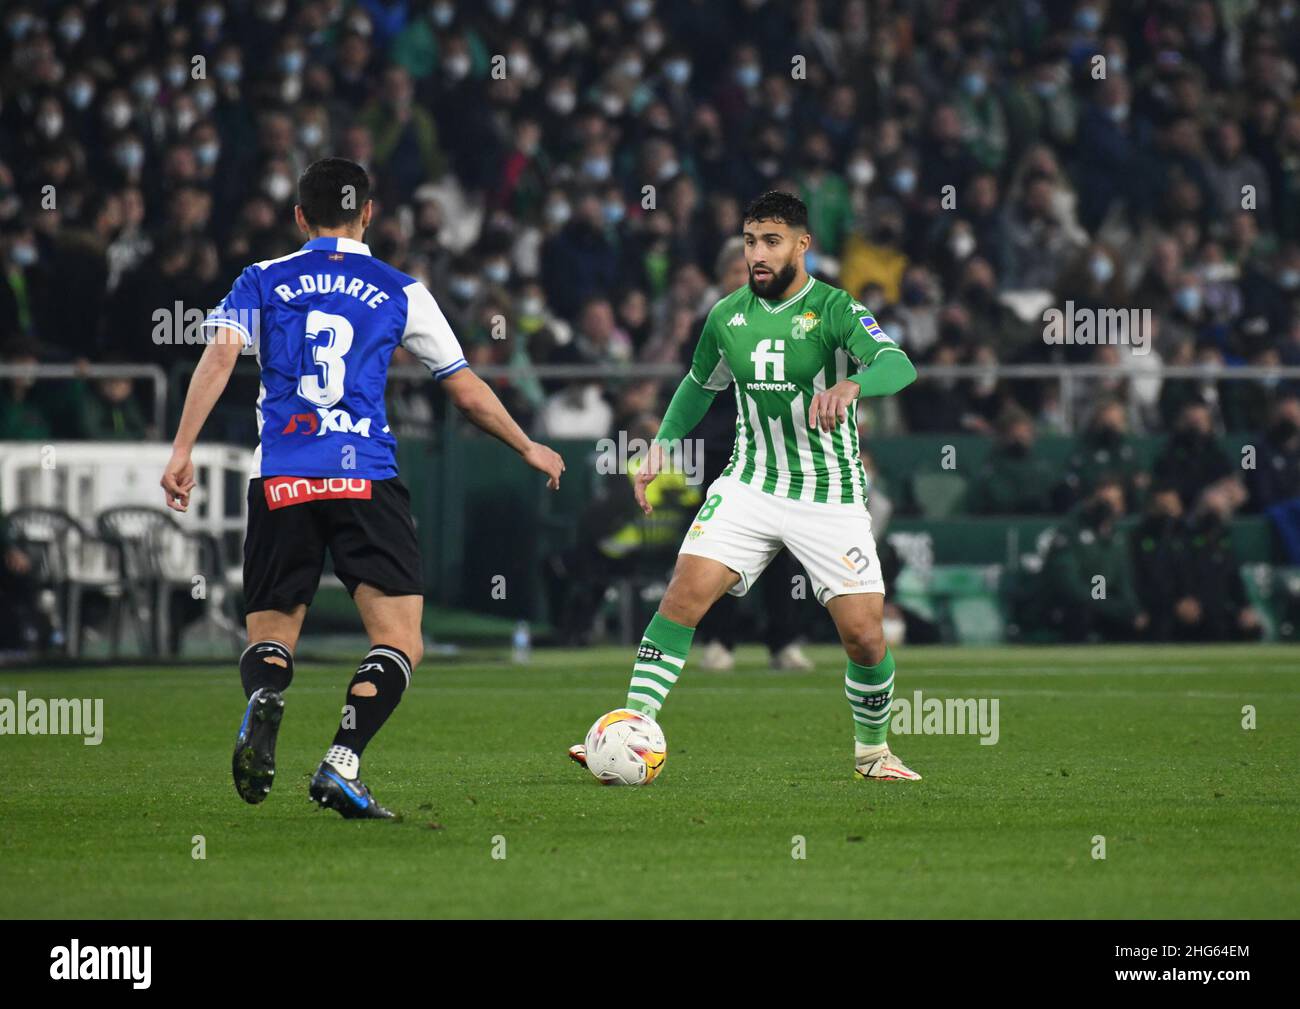 SEVILLE, SPAIN - JANUARY 18: Nabil Fekir #8 of Real Betis drives the ball during the La Liga match between Real Betis and Alavés at Benito Villamarín Stadium on January 18, 2022 in Seville, Spain. (Photo by Sara Aribó/PxImages) Stock Photo